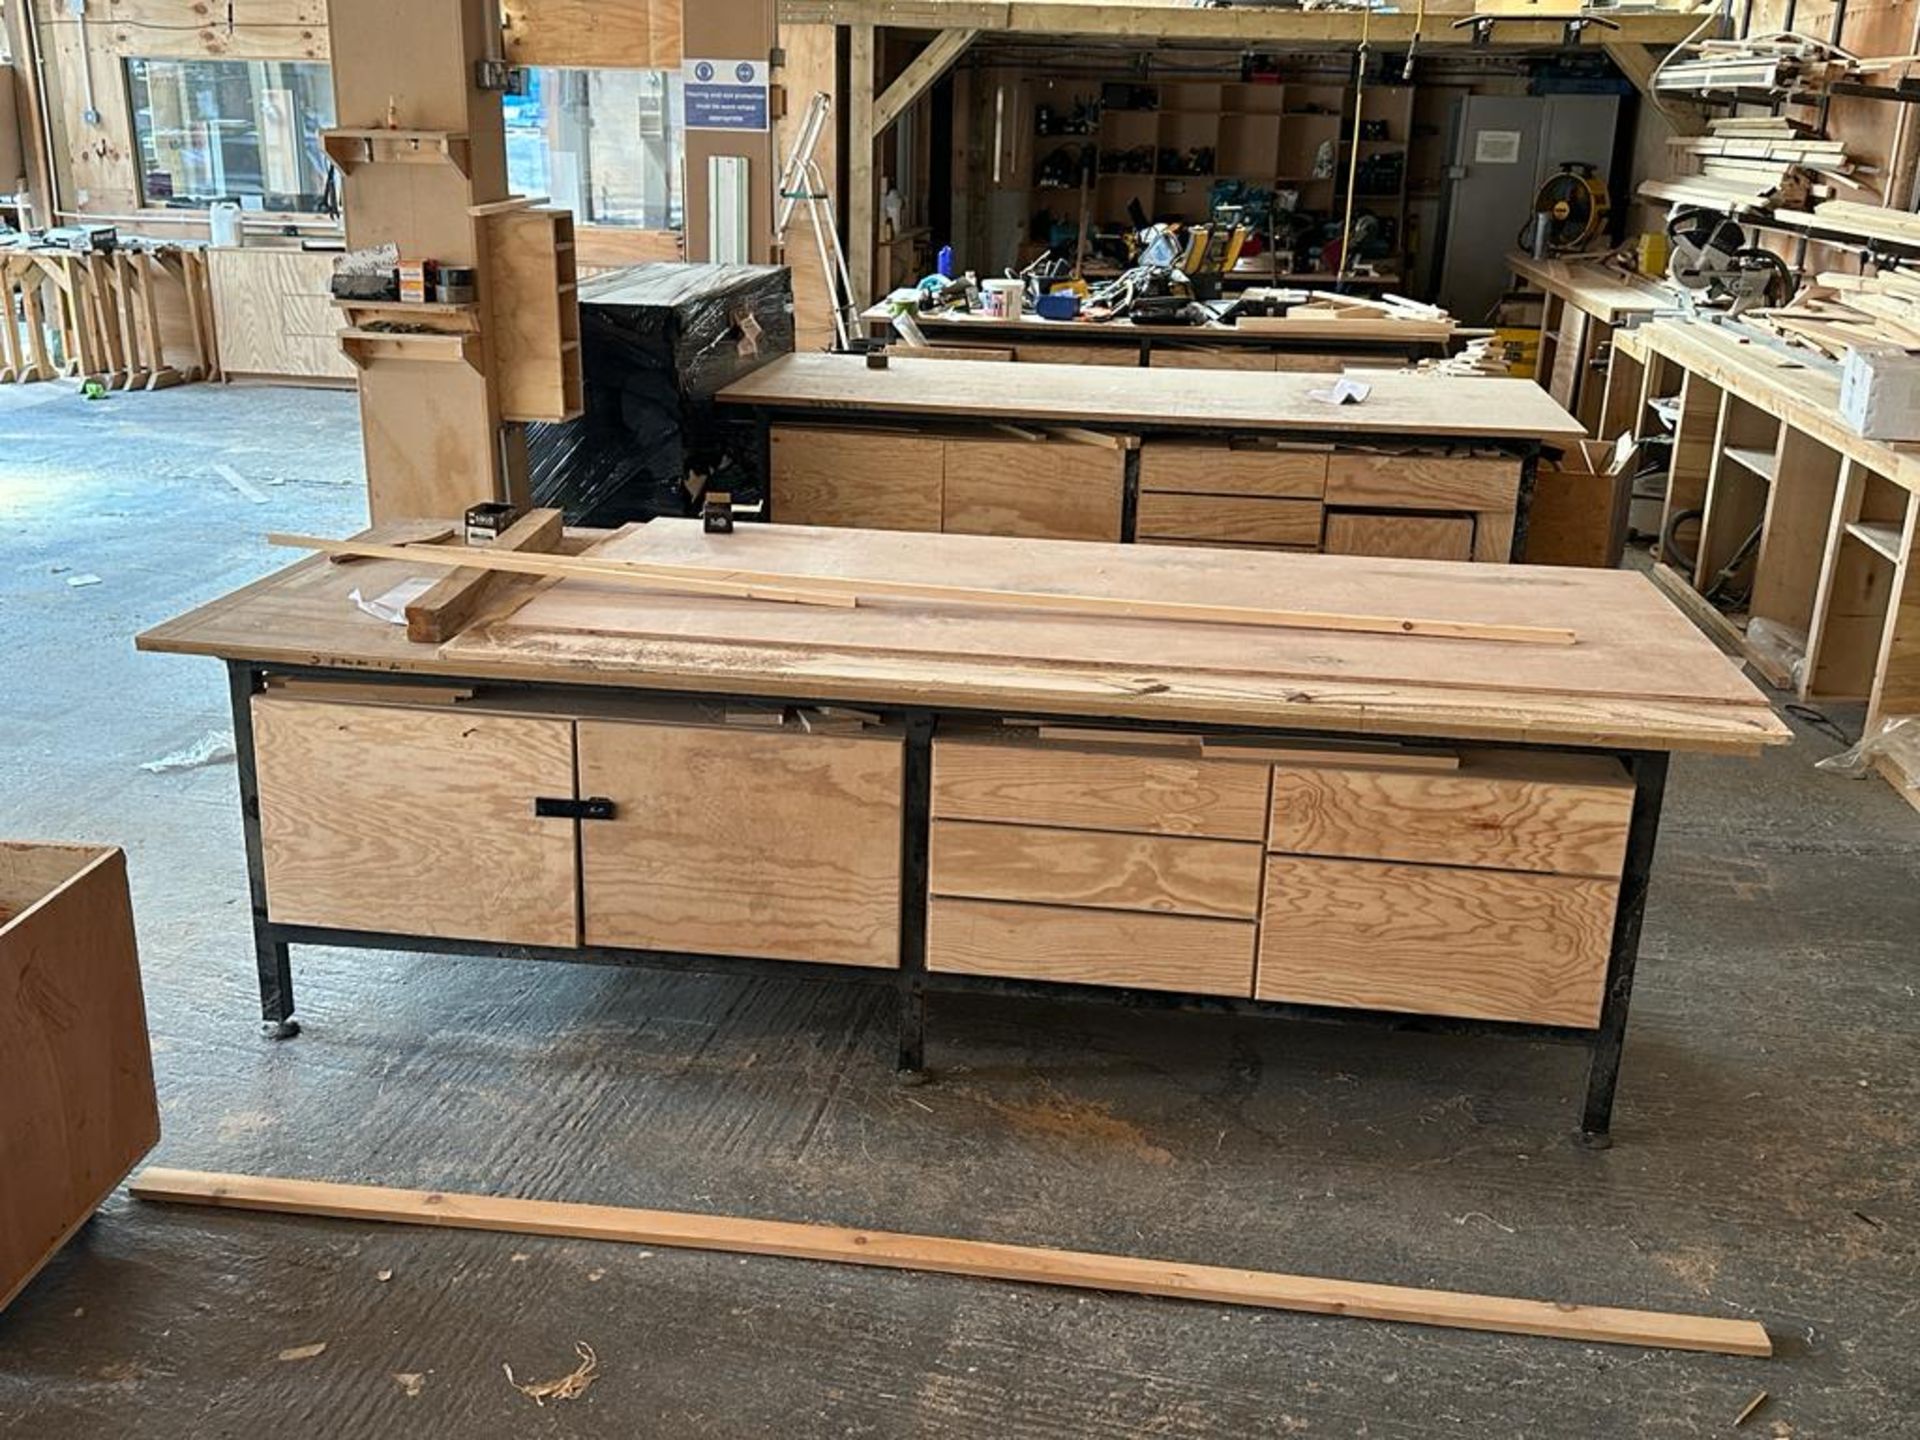 Woodworking Bench #2 - Image 2 of 2